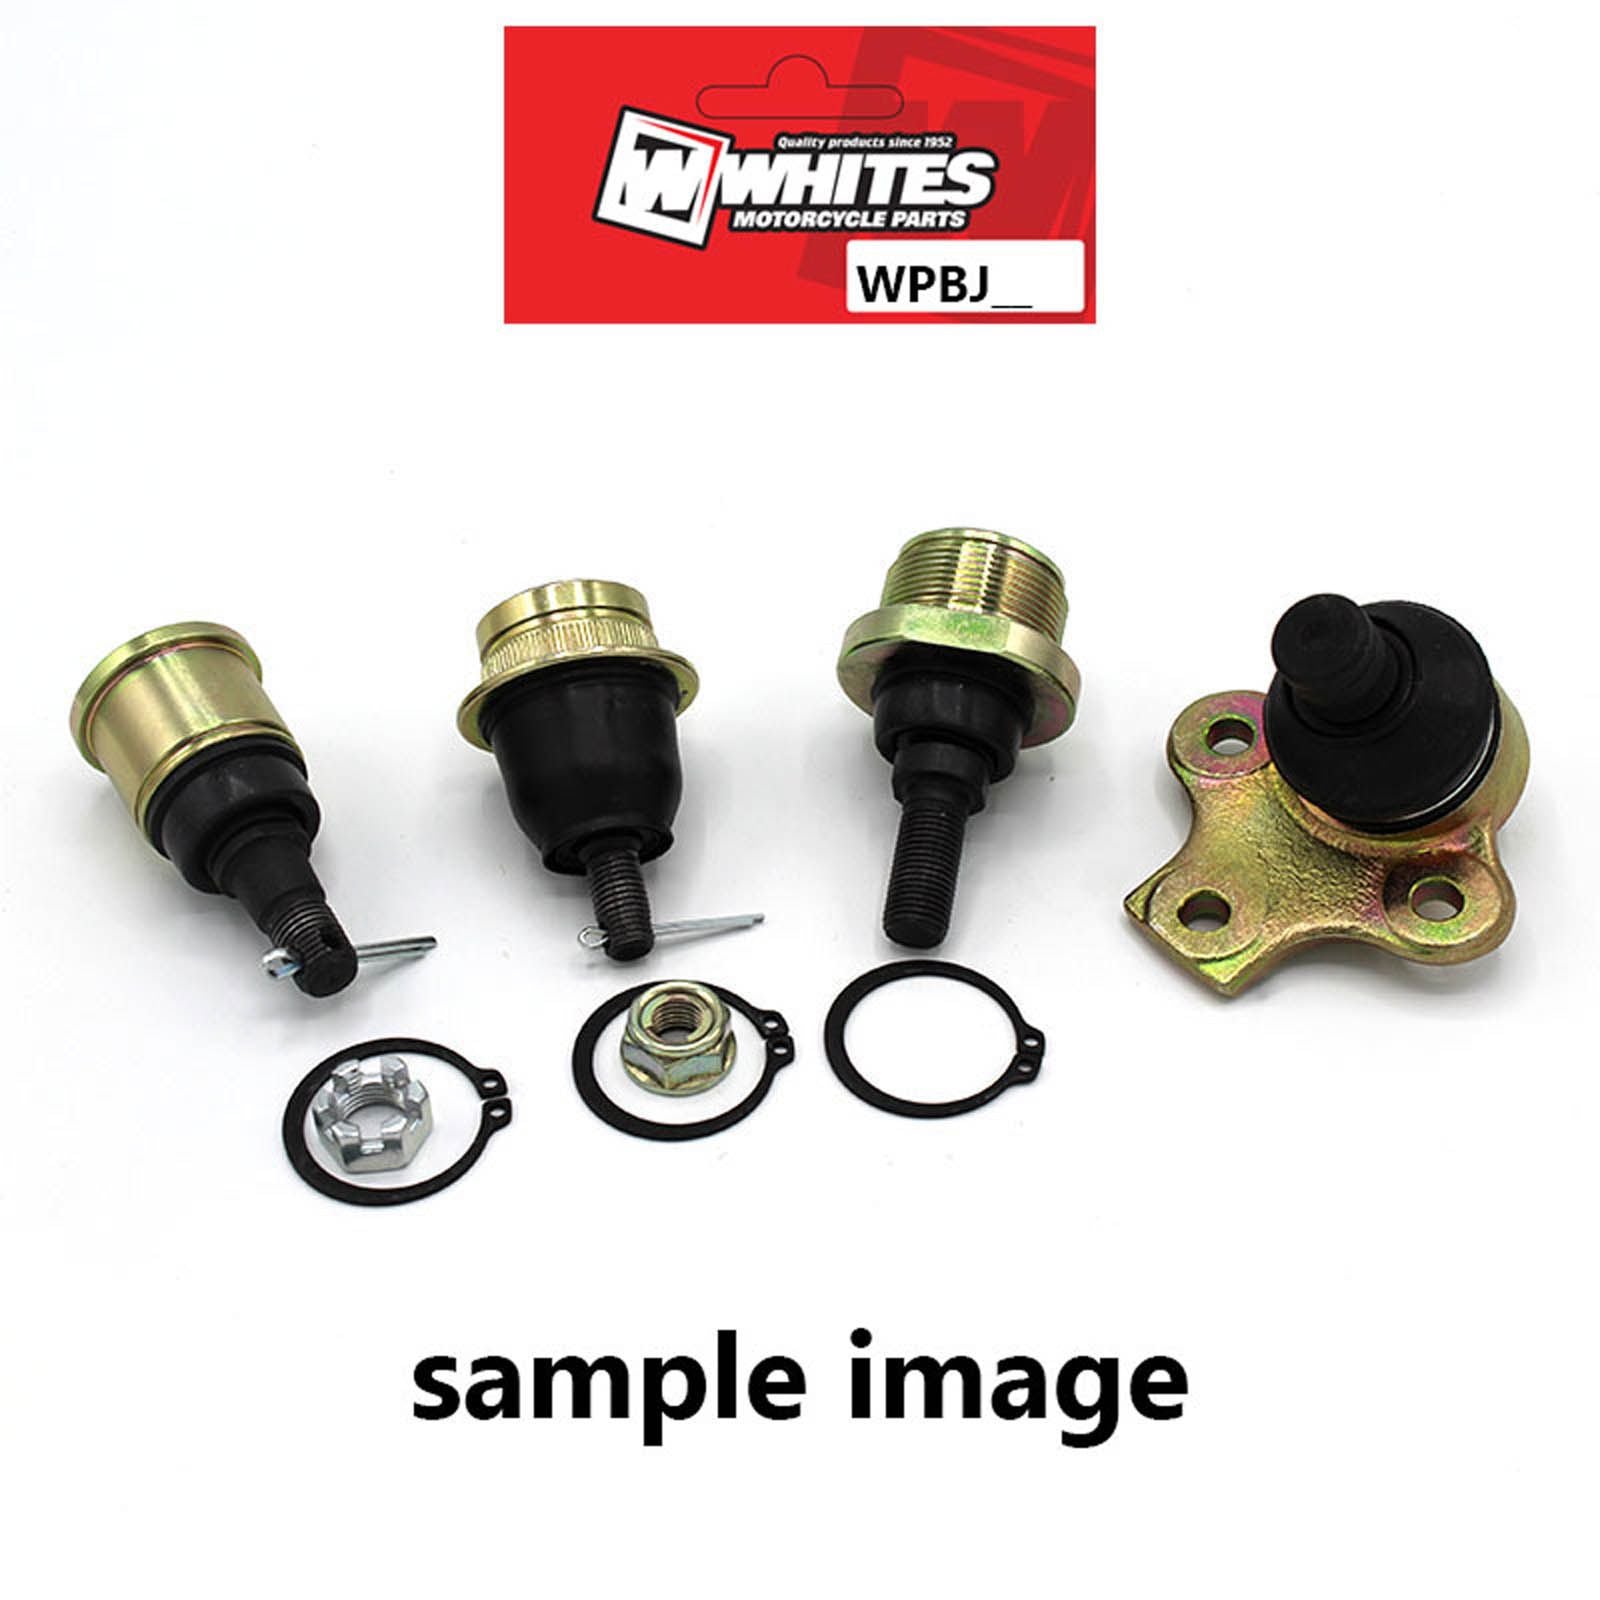 New WHITES Motorcycle Ball Joint Heavy Duty #WPBJ59